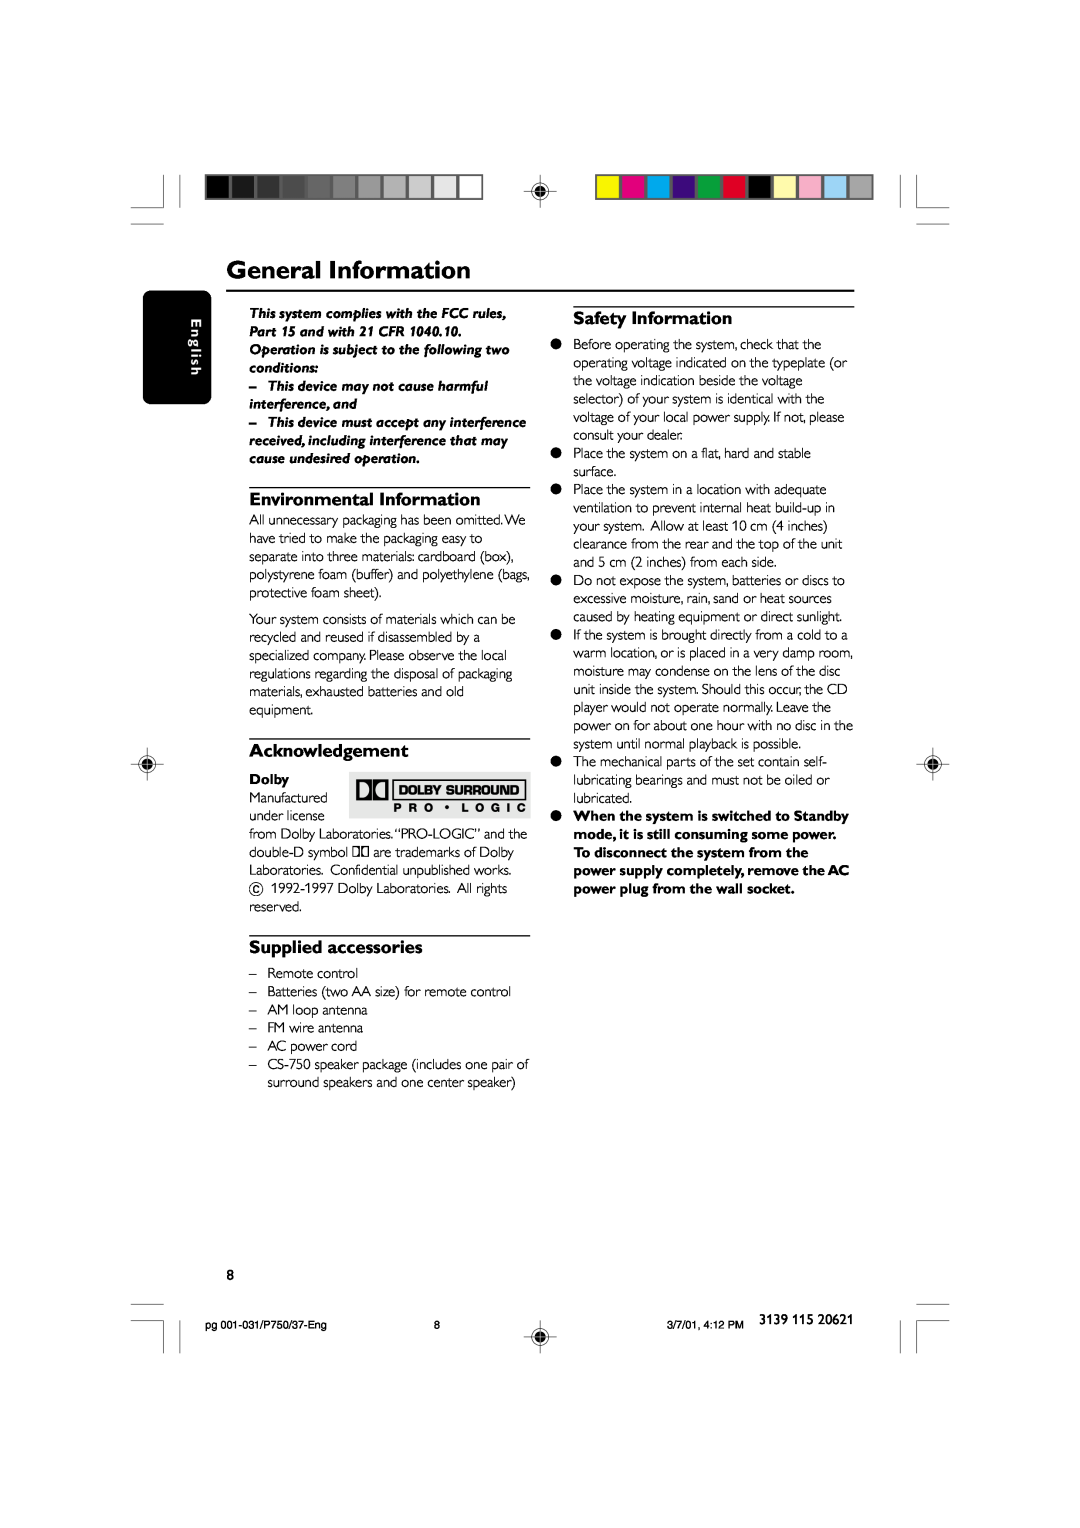 Philips FWP750 General Information, Environmental Information, Acknowledgement, Safety Information, Supplied accessories 